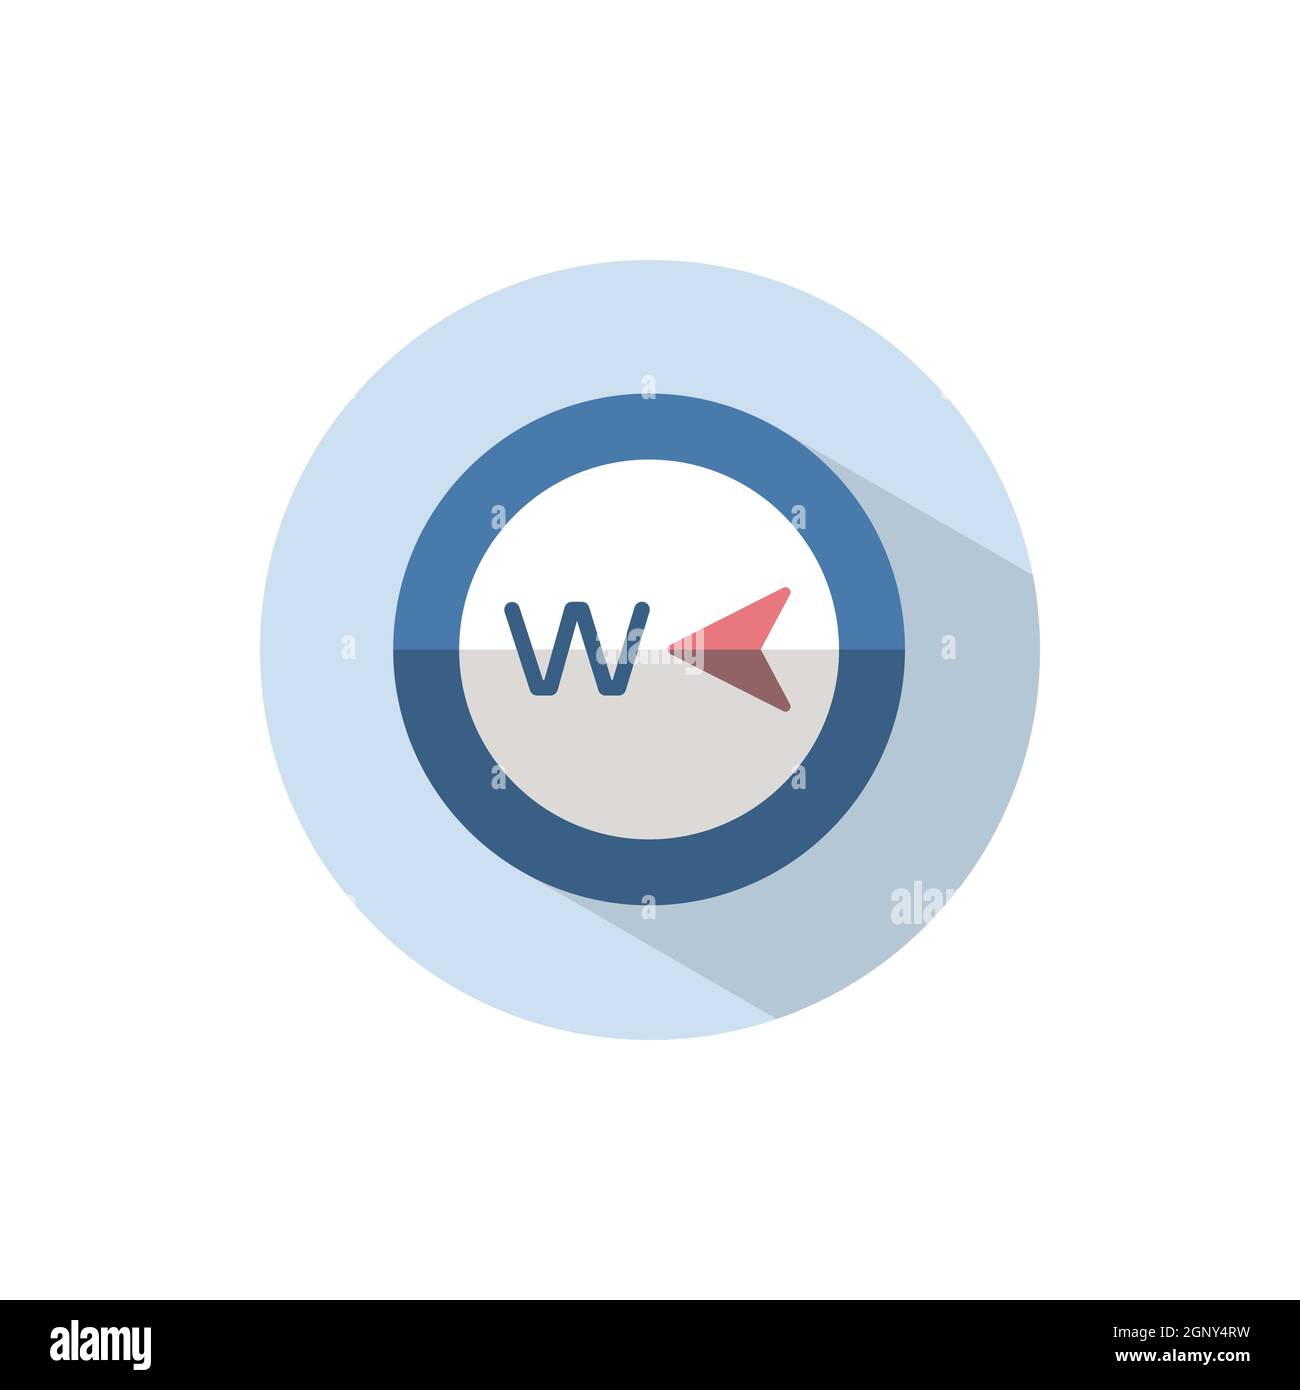 West direction. Flat icon on a circle. Weather vector illustration Stock Vector